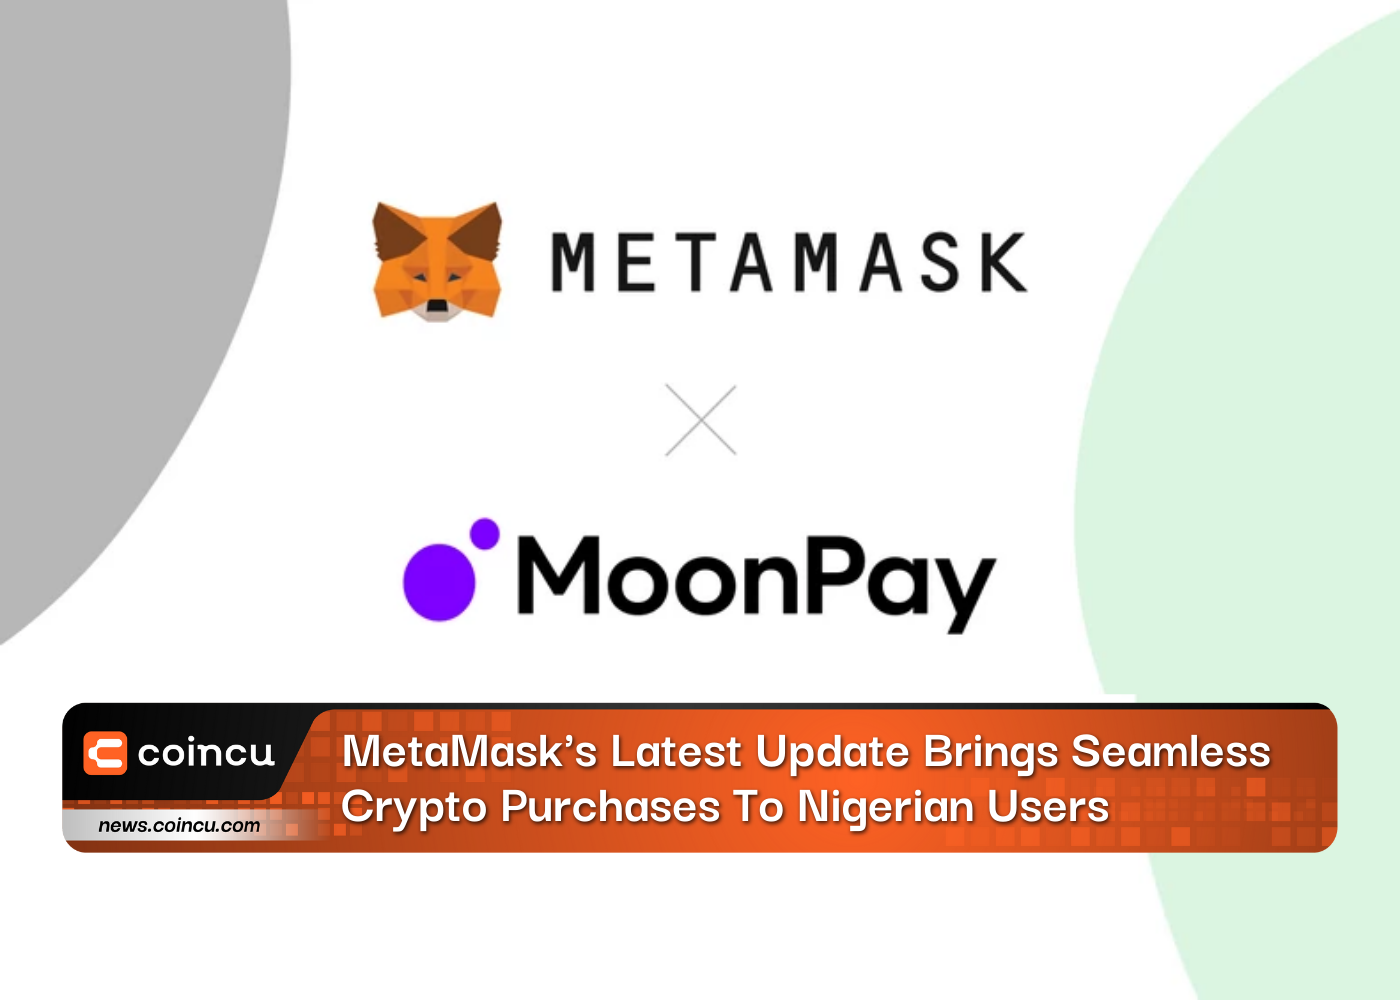 MetaMask's Latest Update Brings Seamless Crypto Purchases To Nigerian Users